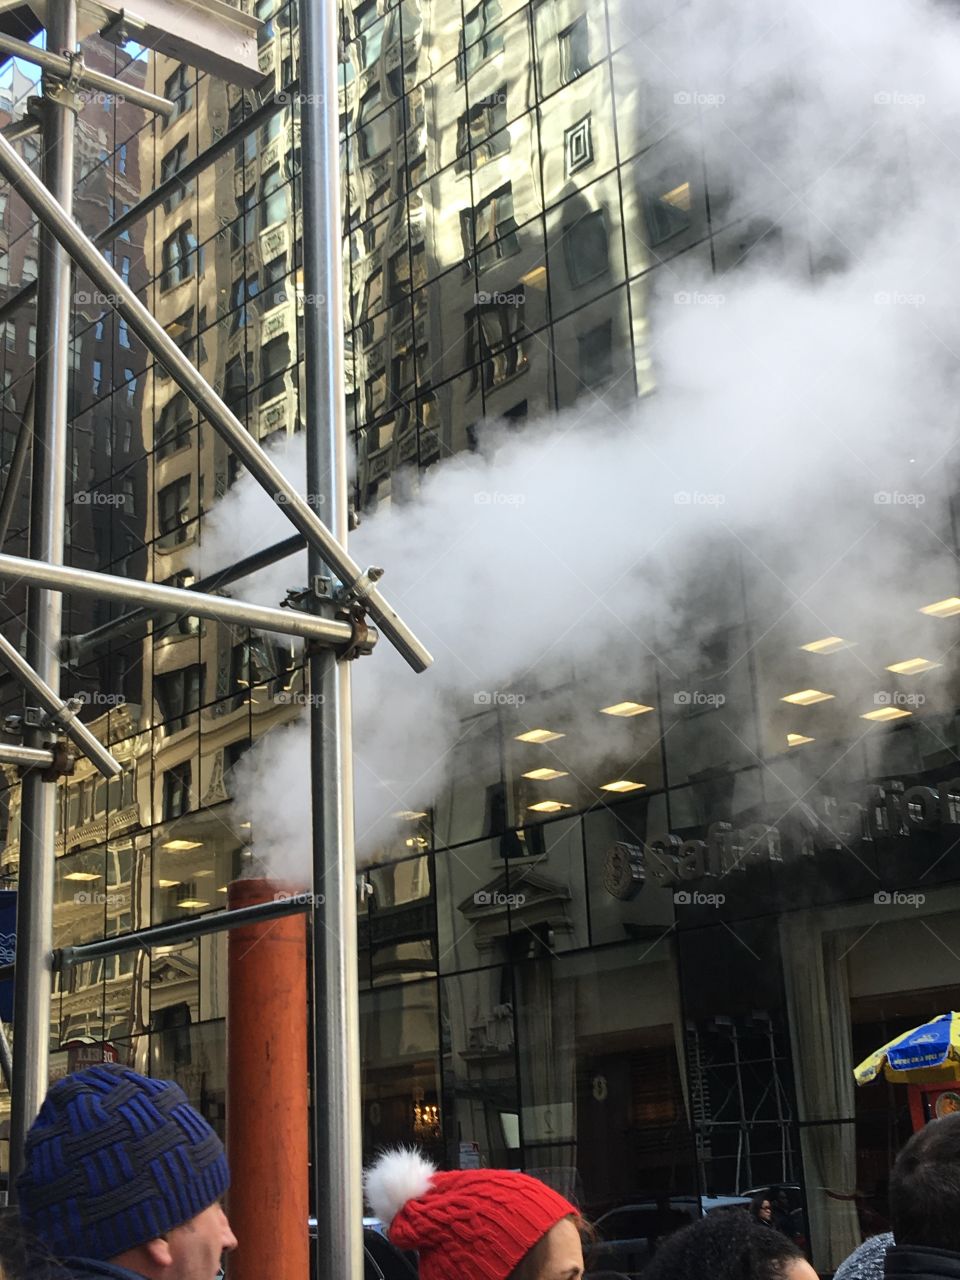 One of the many steam vents found in New York City, all the buildings there use steam heating, and sometimes that steam builds up and needs to be released somewhere.